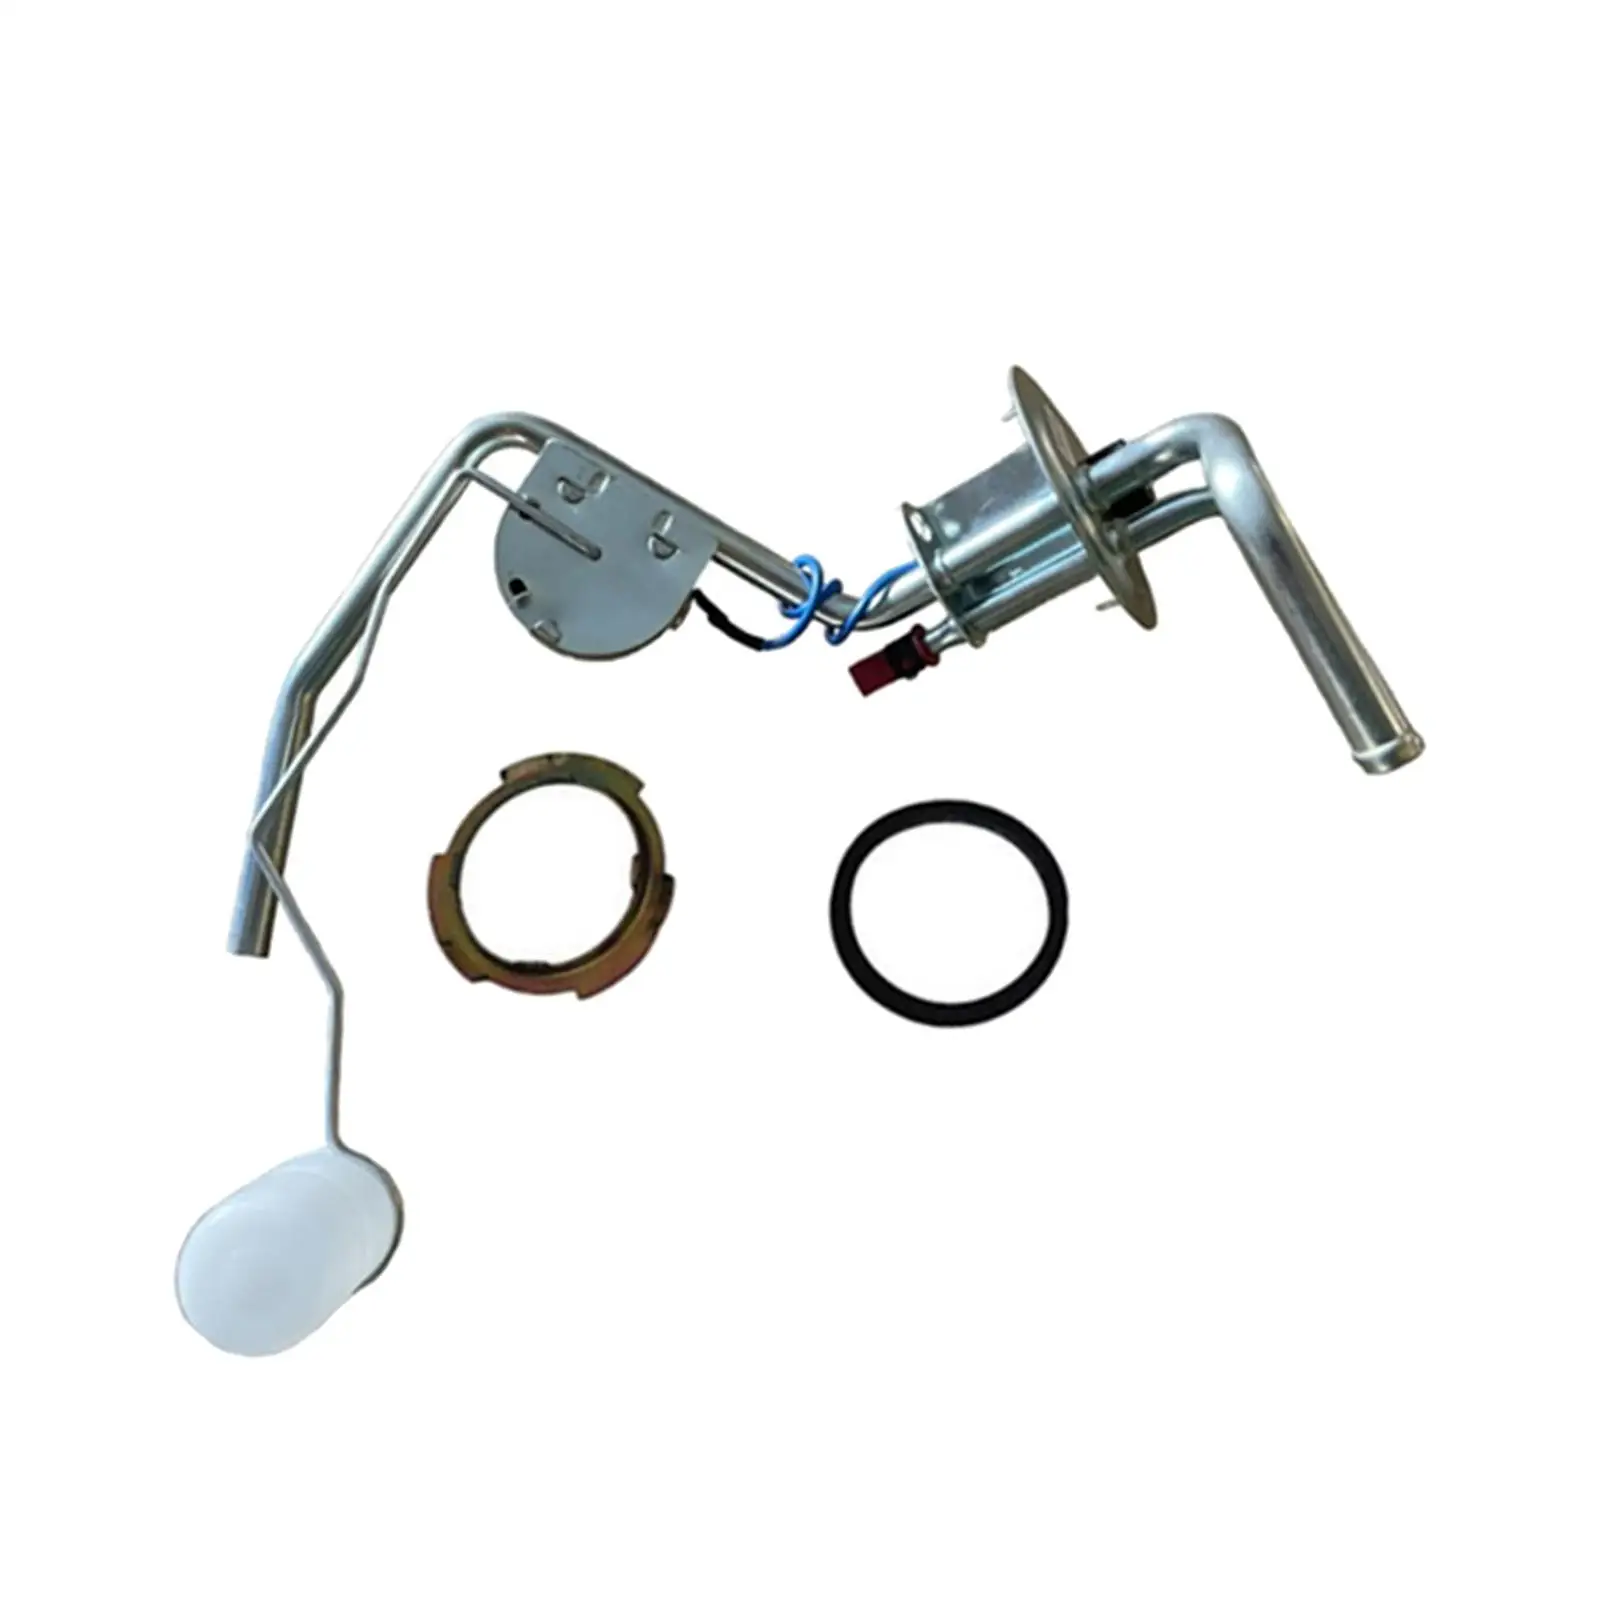 Rear Fuel Tank Sending Unit Repair Parts for Ford F250 F350 Easy Installation